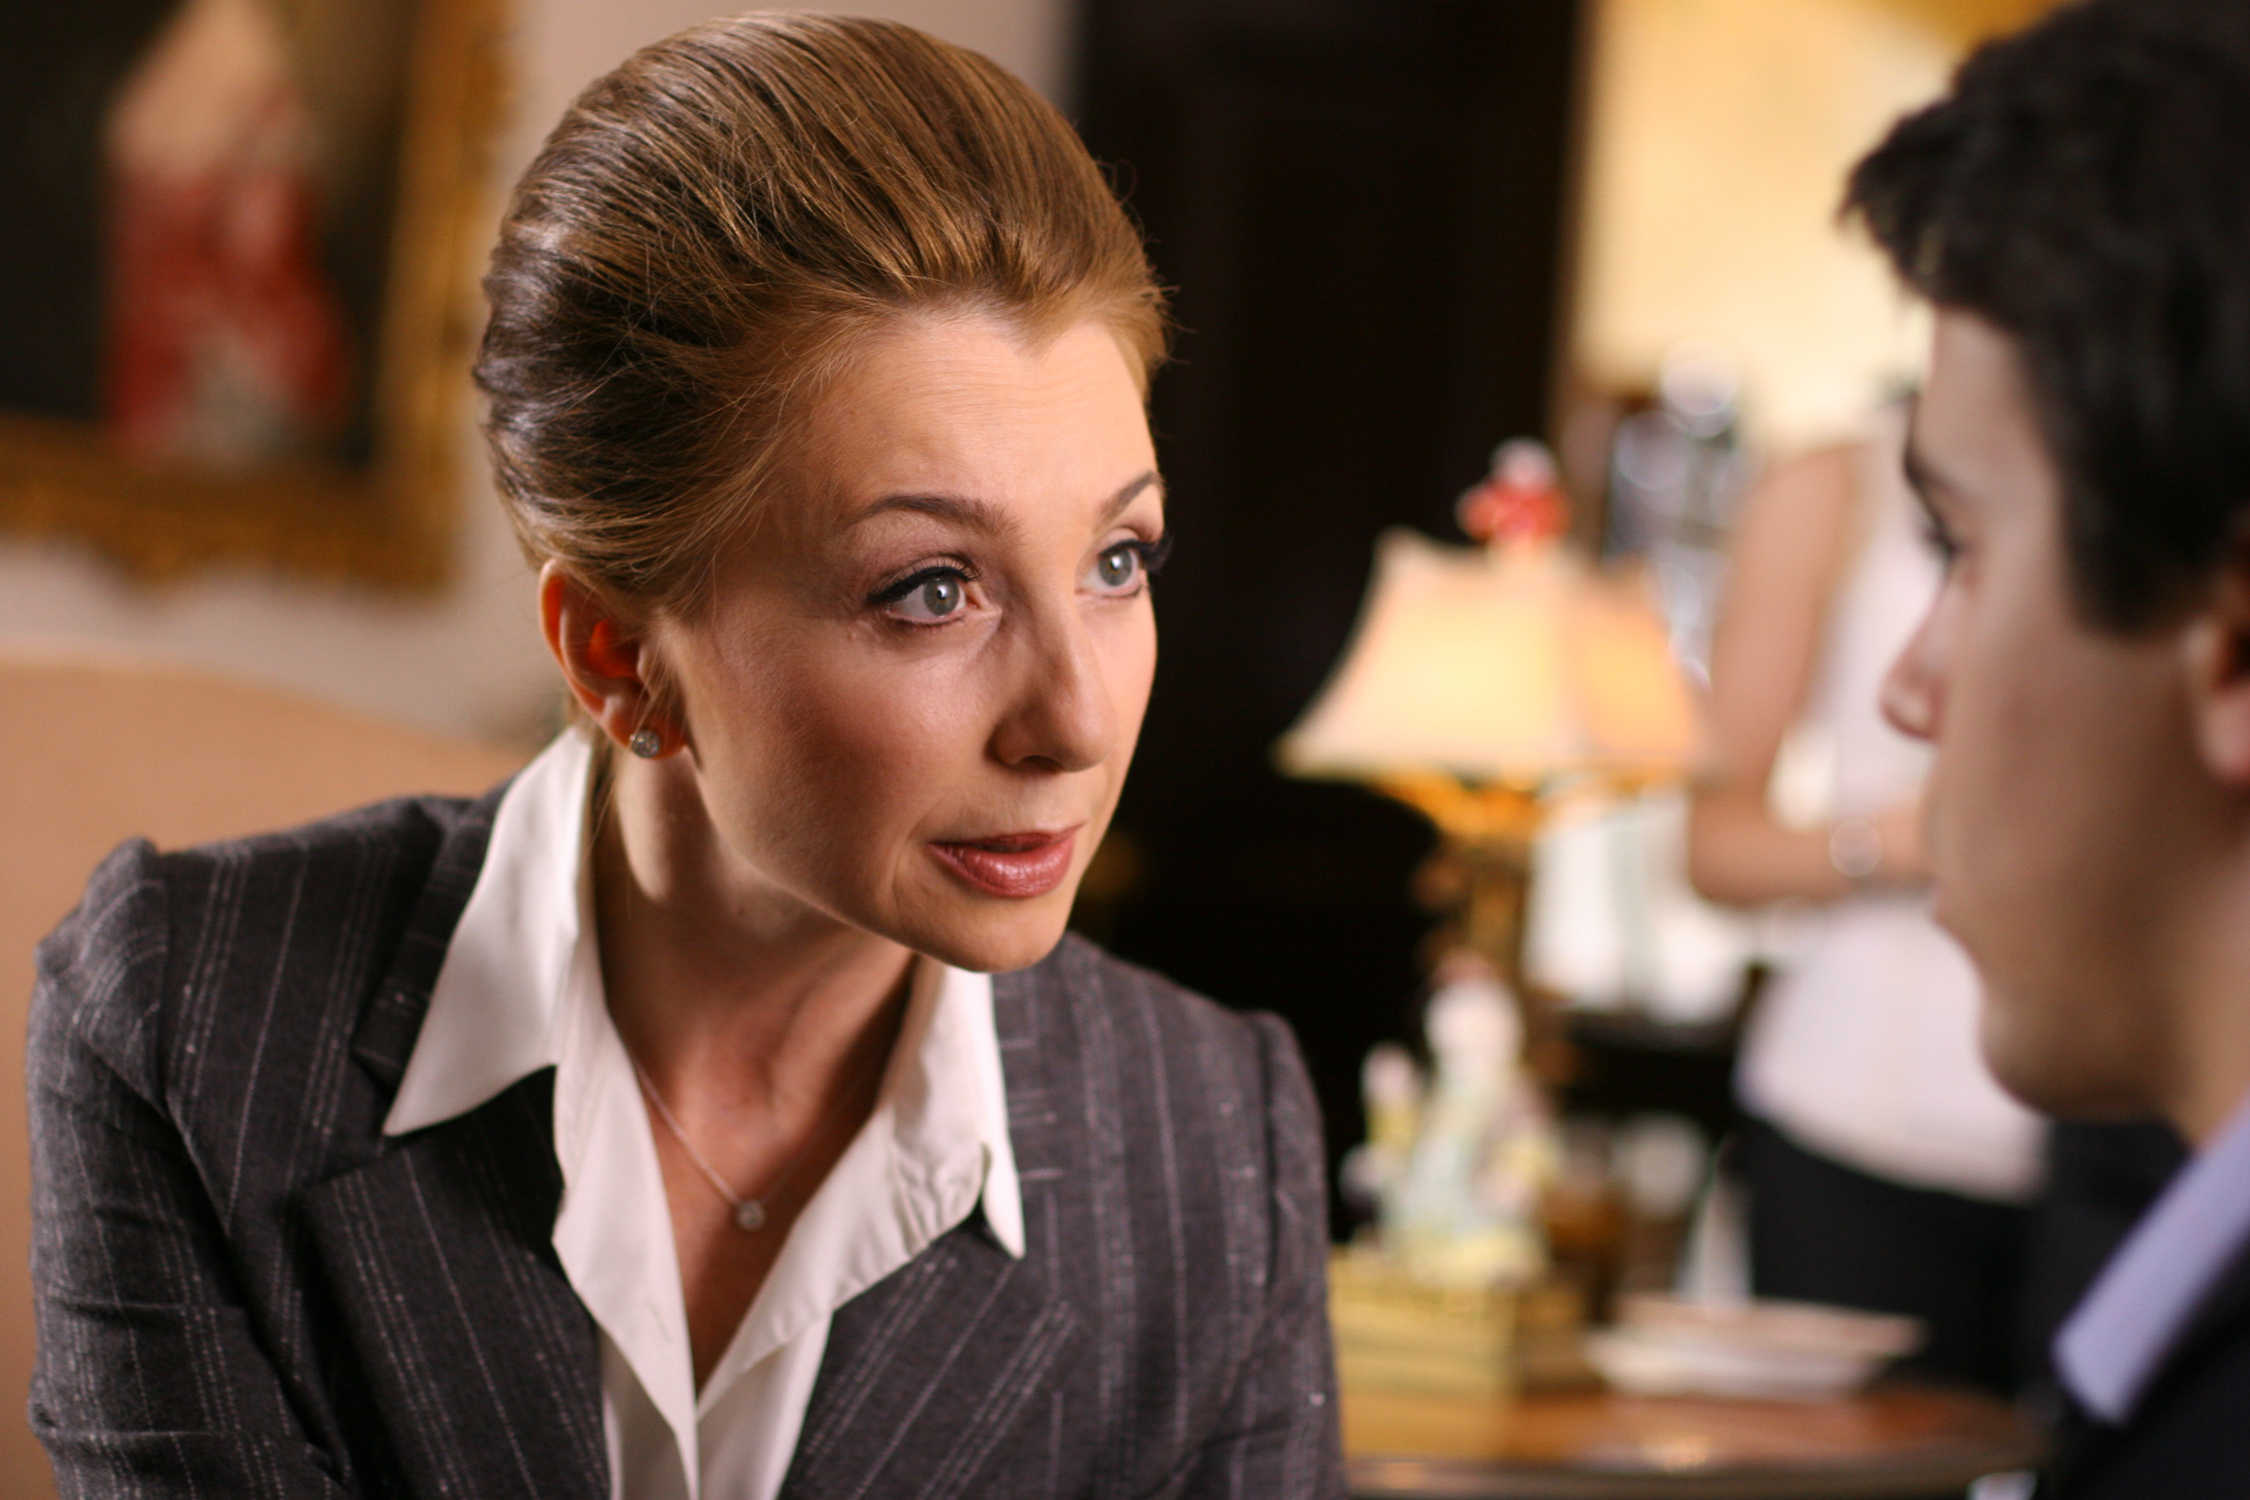 Donna Murphy stars as Evelyn Black in Starry Night Entertainment's Sherman's Way (2009)